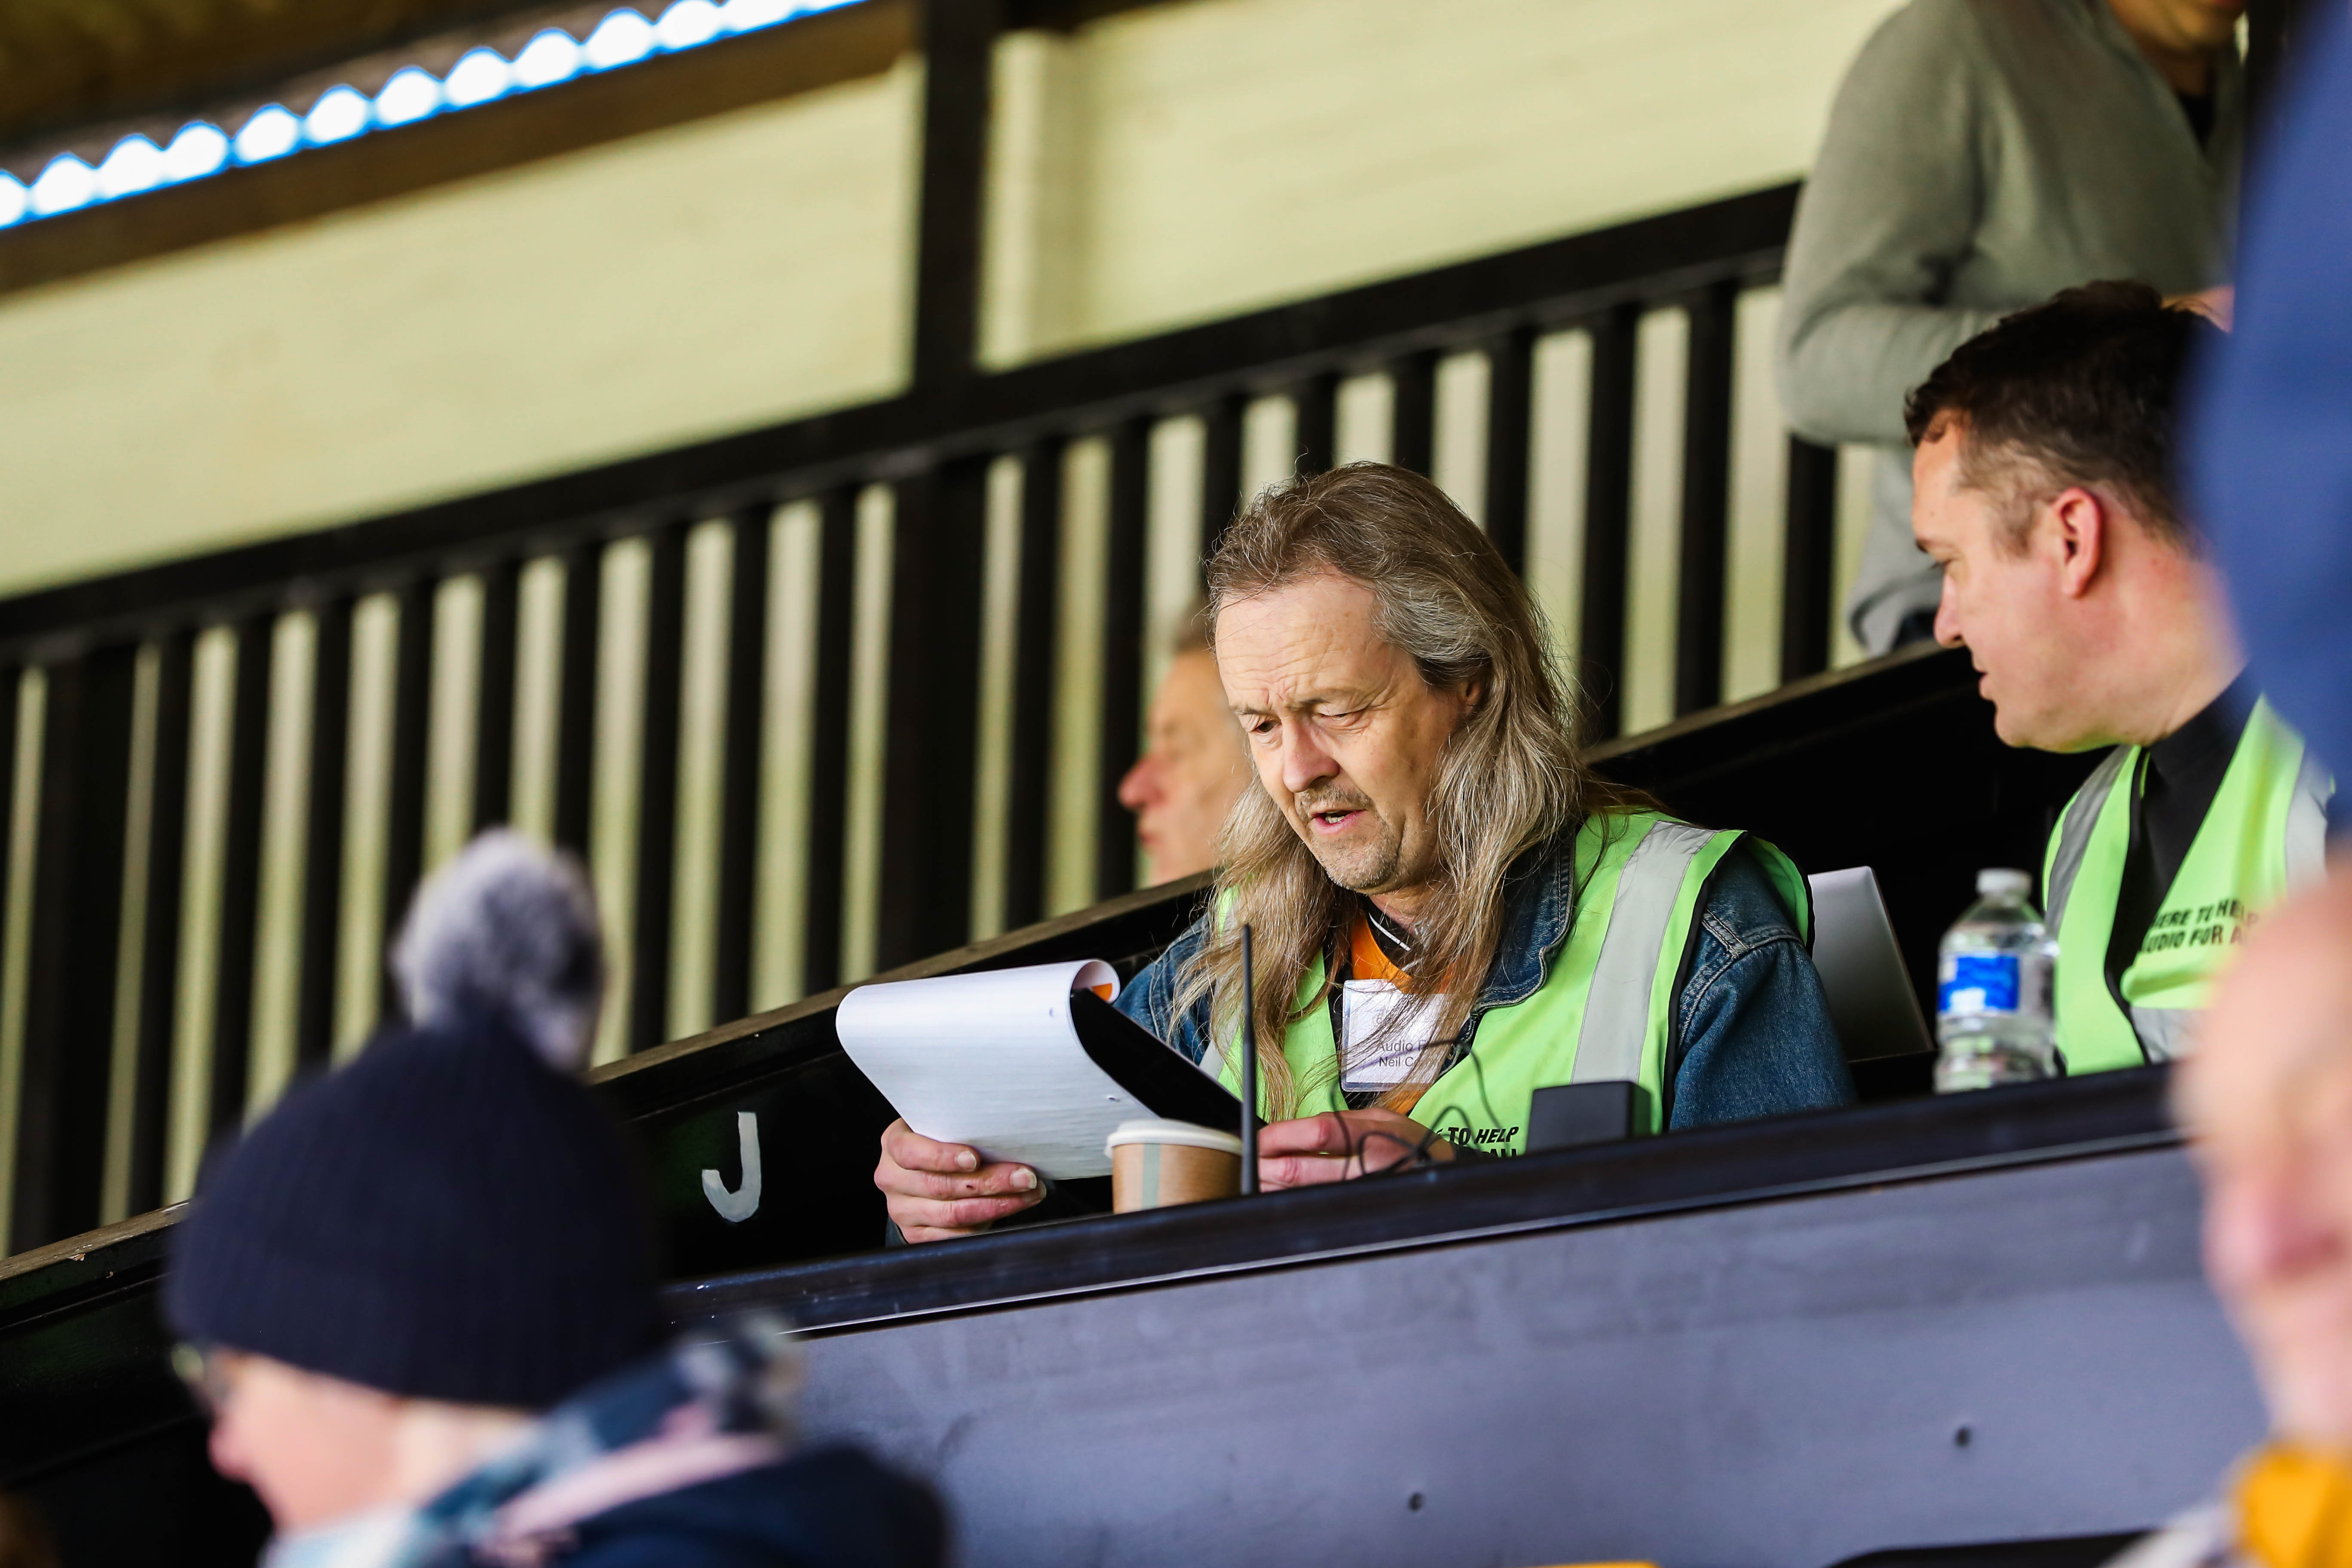 The Club's Audio for All Commentator reads up on his notes